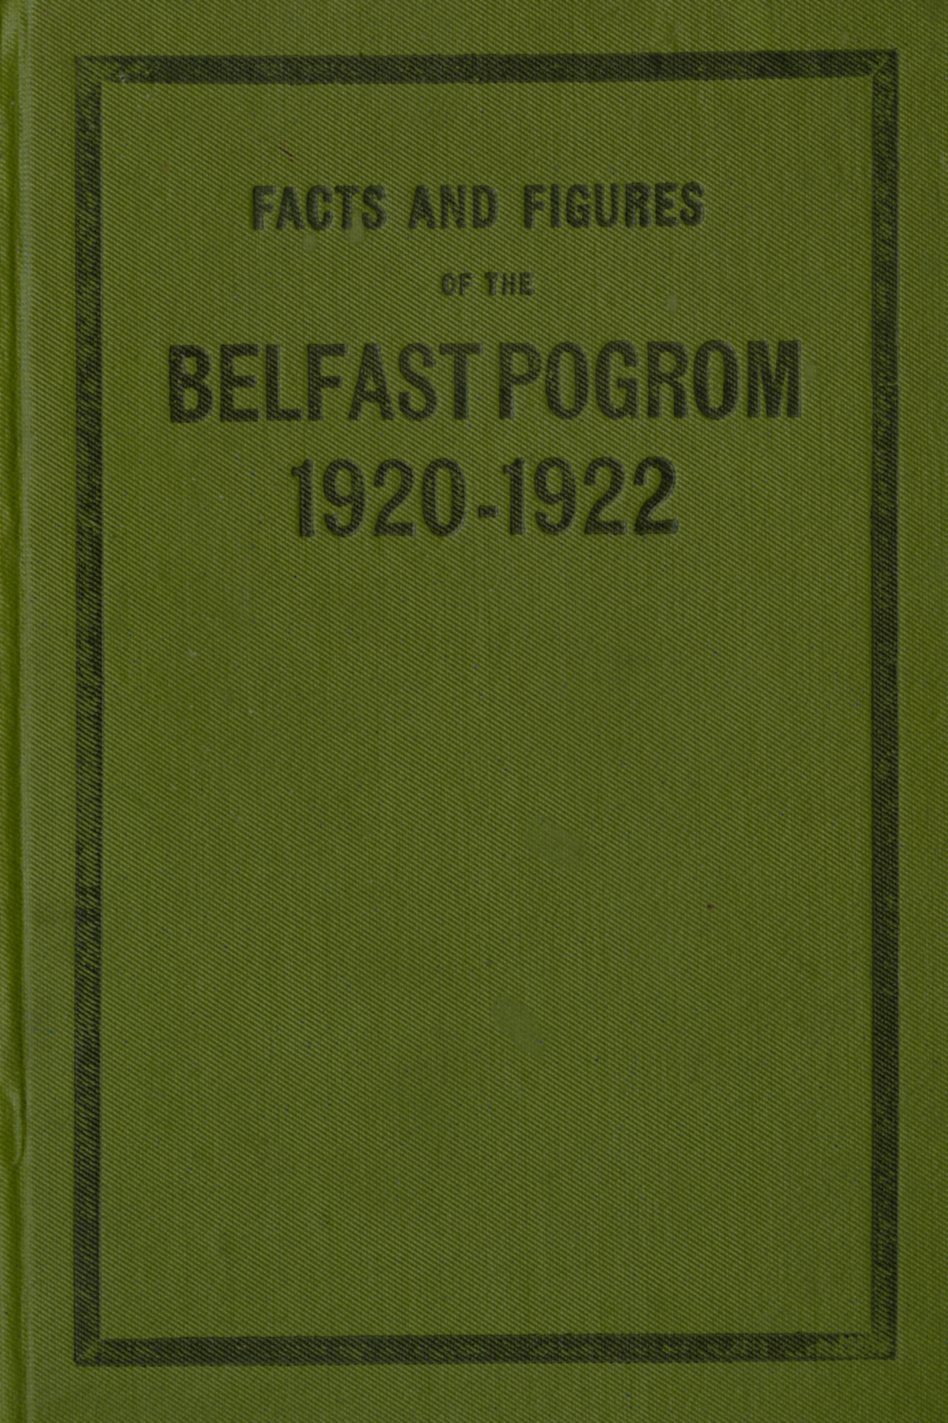 Extremely Rare Report - The Belfast Pogrom,